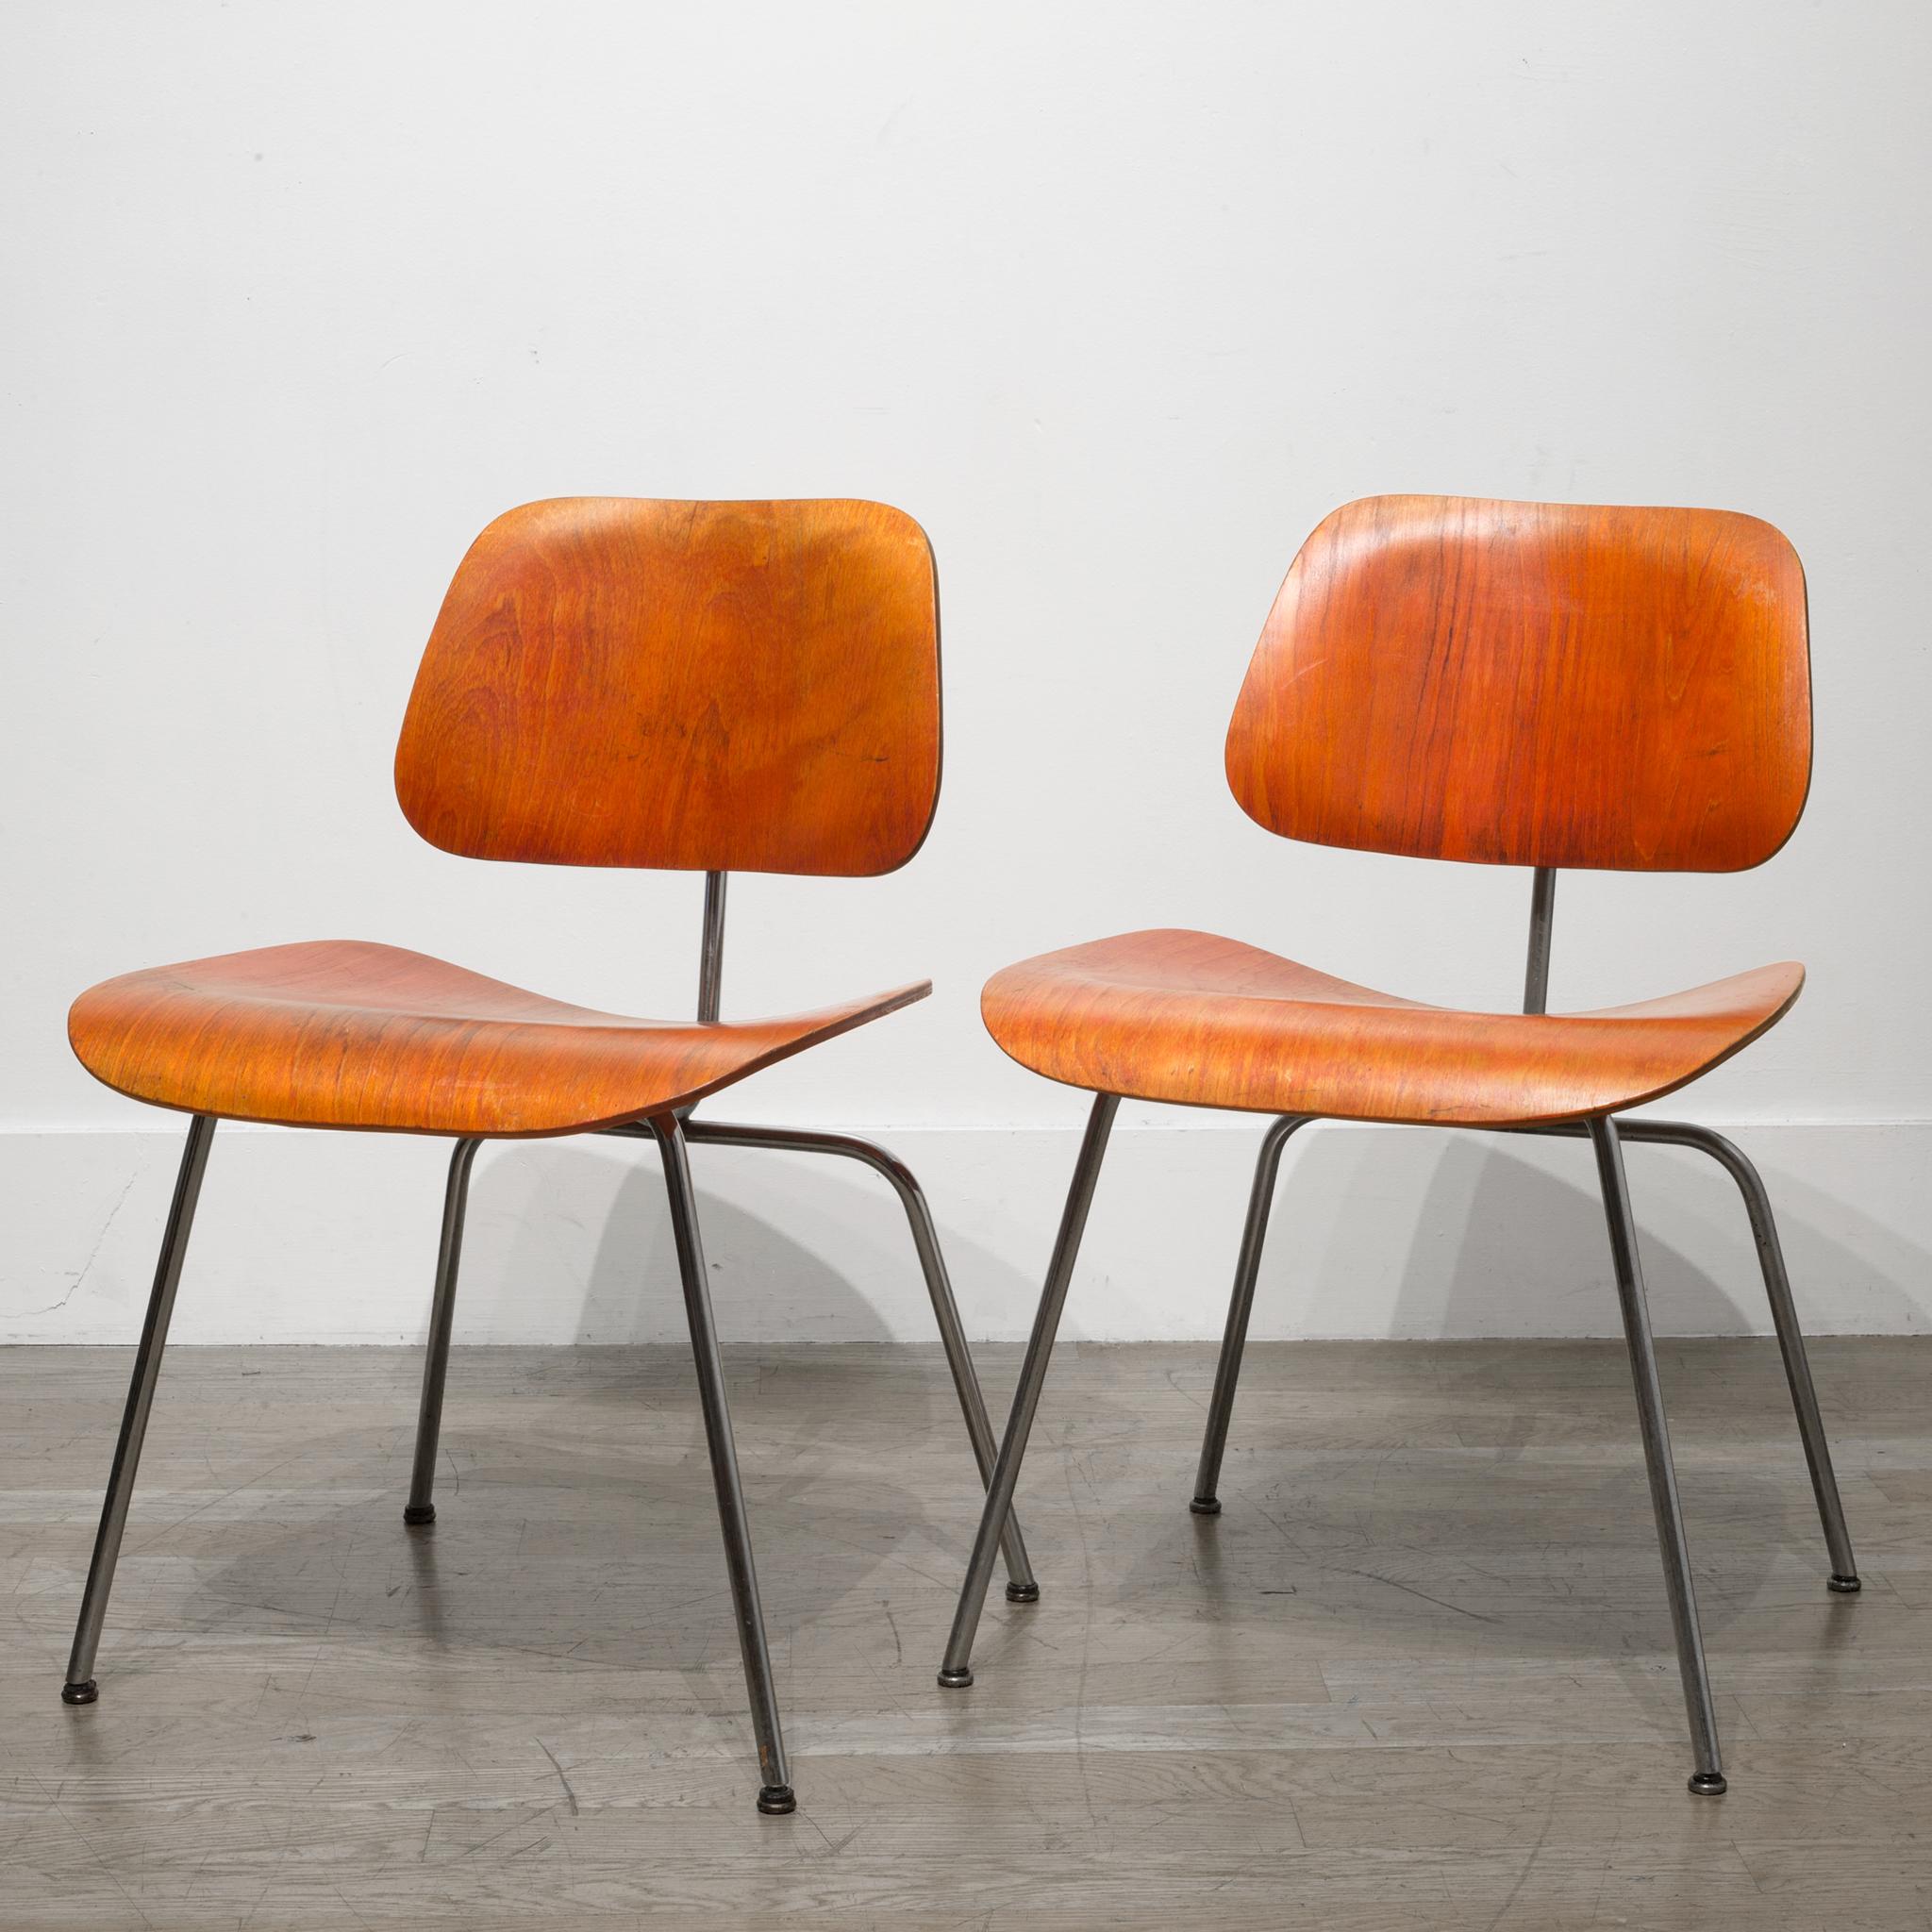 About

This is a rare set of red aniline early Herman Miller DCM, possibly Evans, with walnut veneer seat and back with metal legs. All chairs have the original feet. These chairs are fabricated from molded plywood seats and backs attached to a